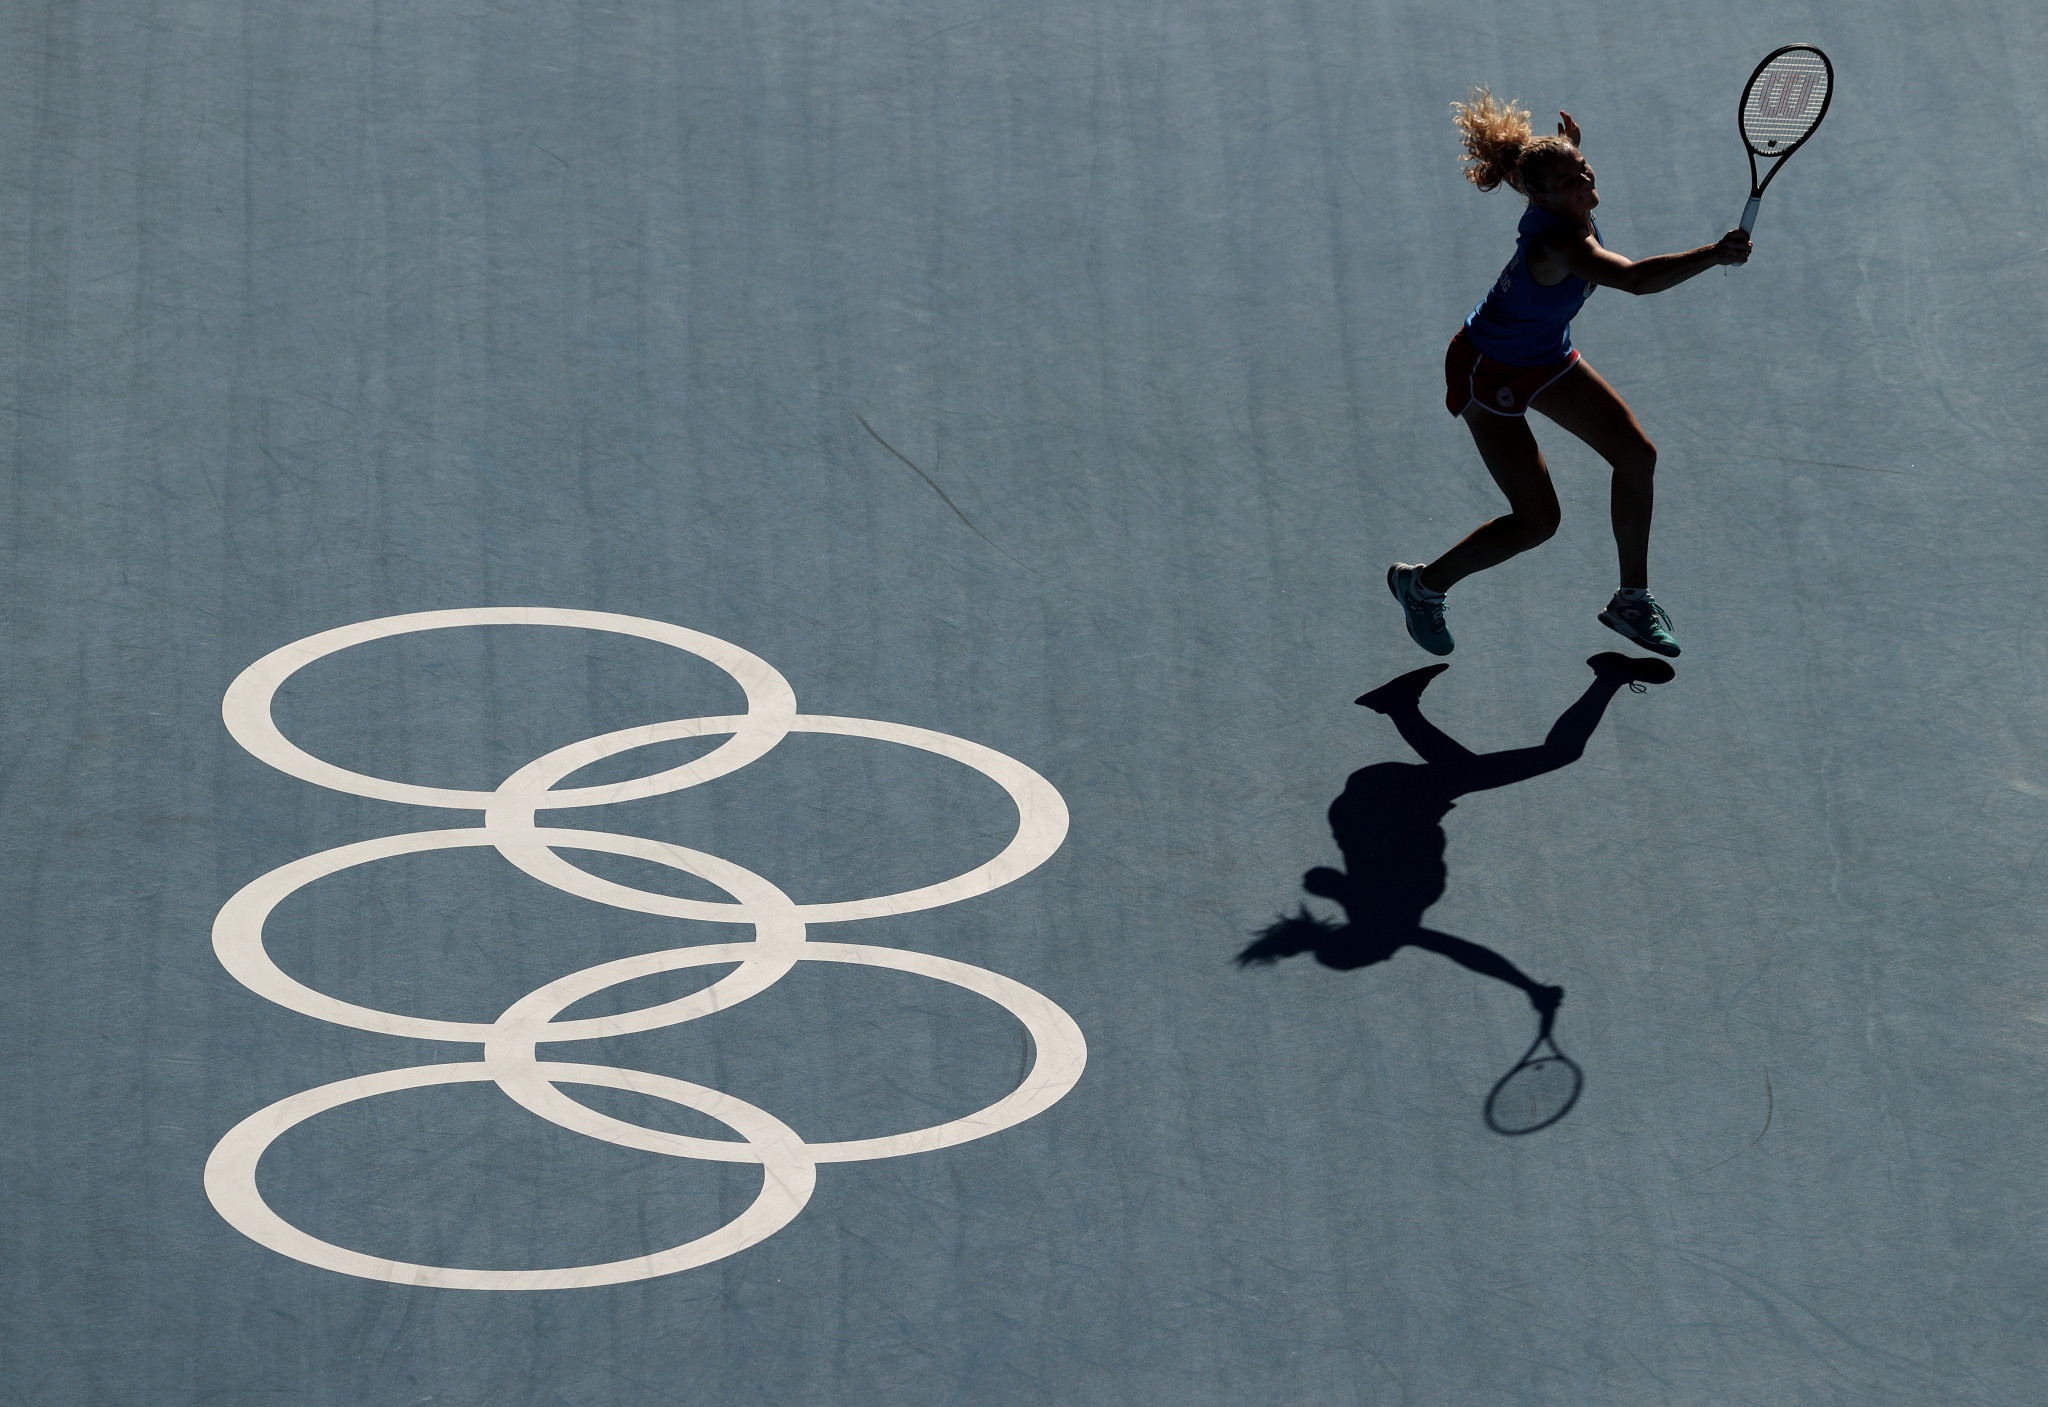 Paris will be the first city to host three Olympic tennis tournaments Getty Images